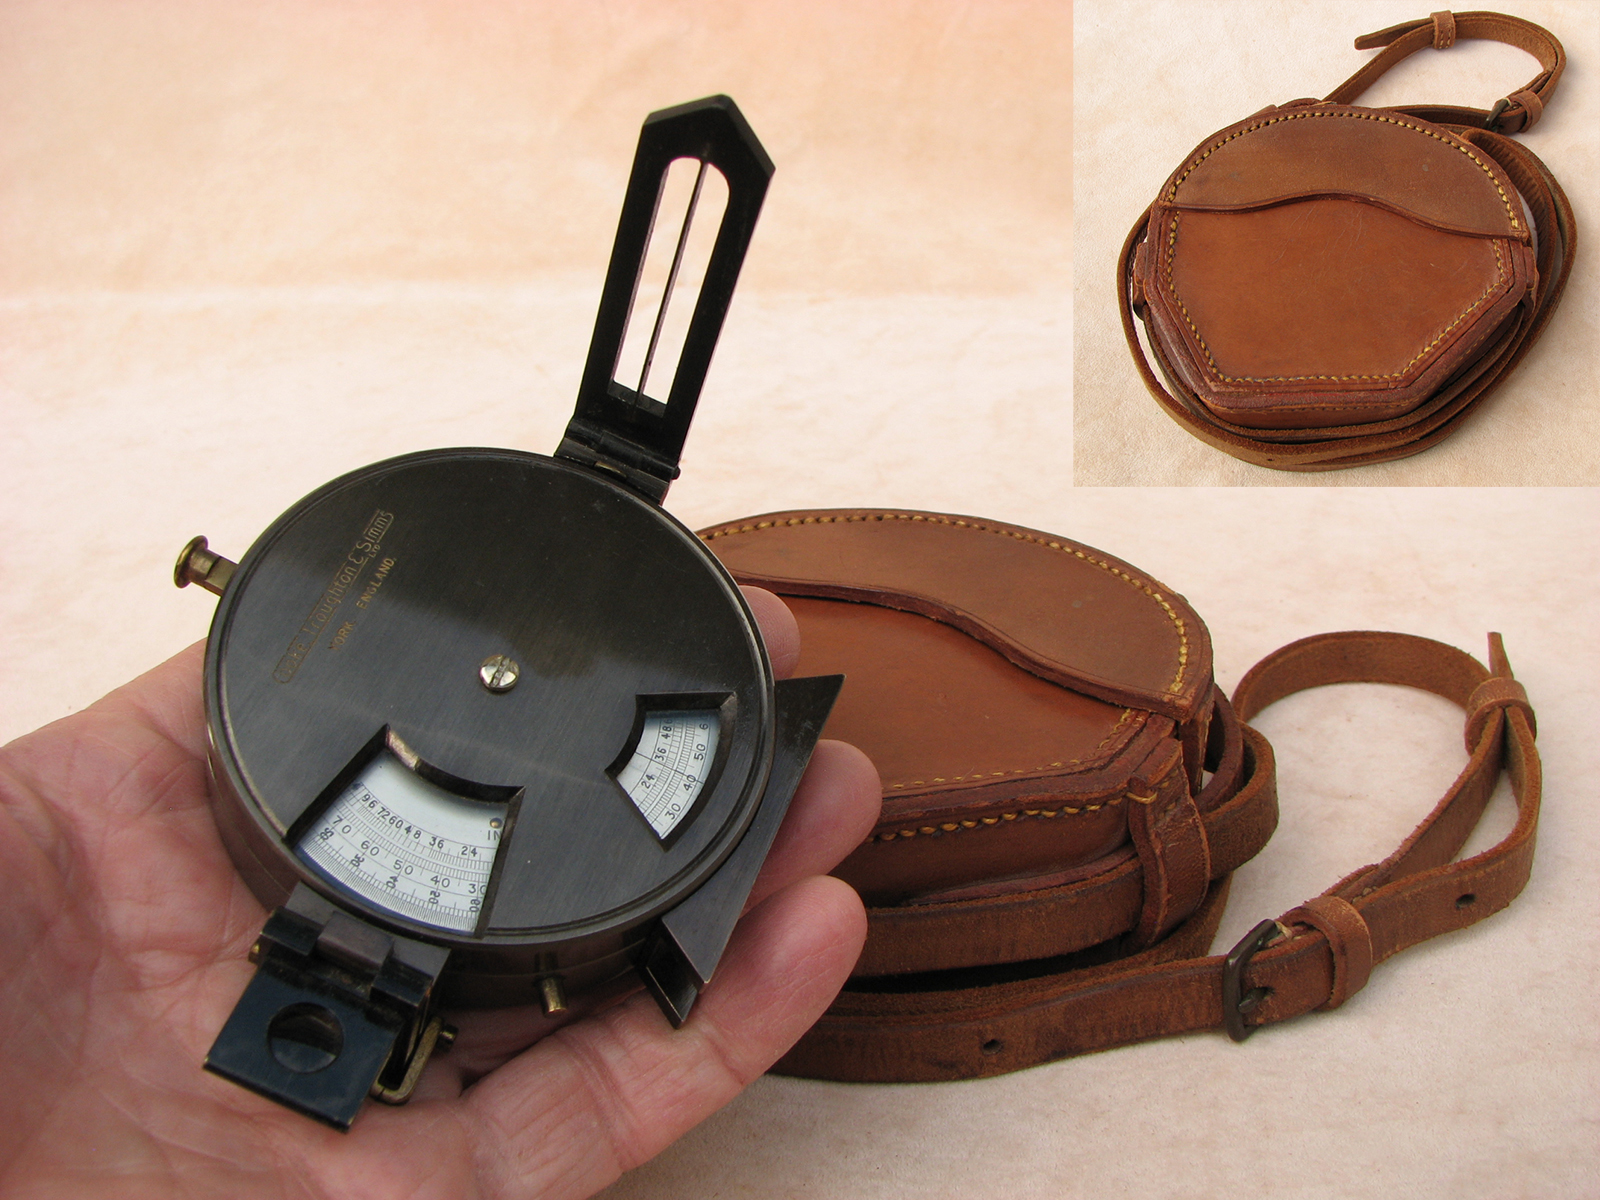 Cooke Troughton & Simms Angle of Sight compass clinometer with case